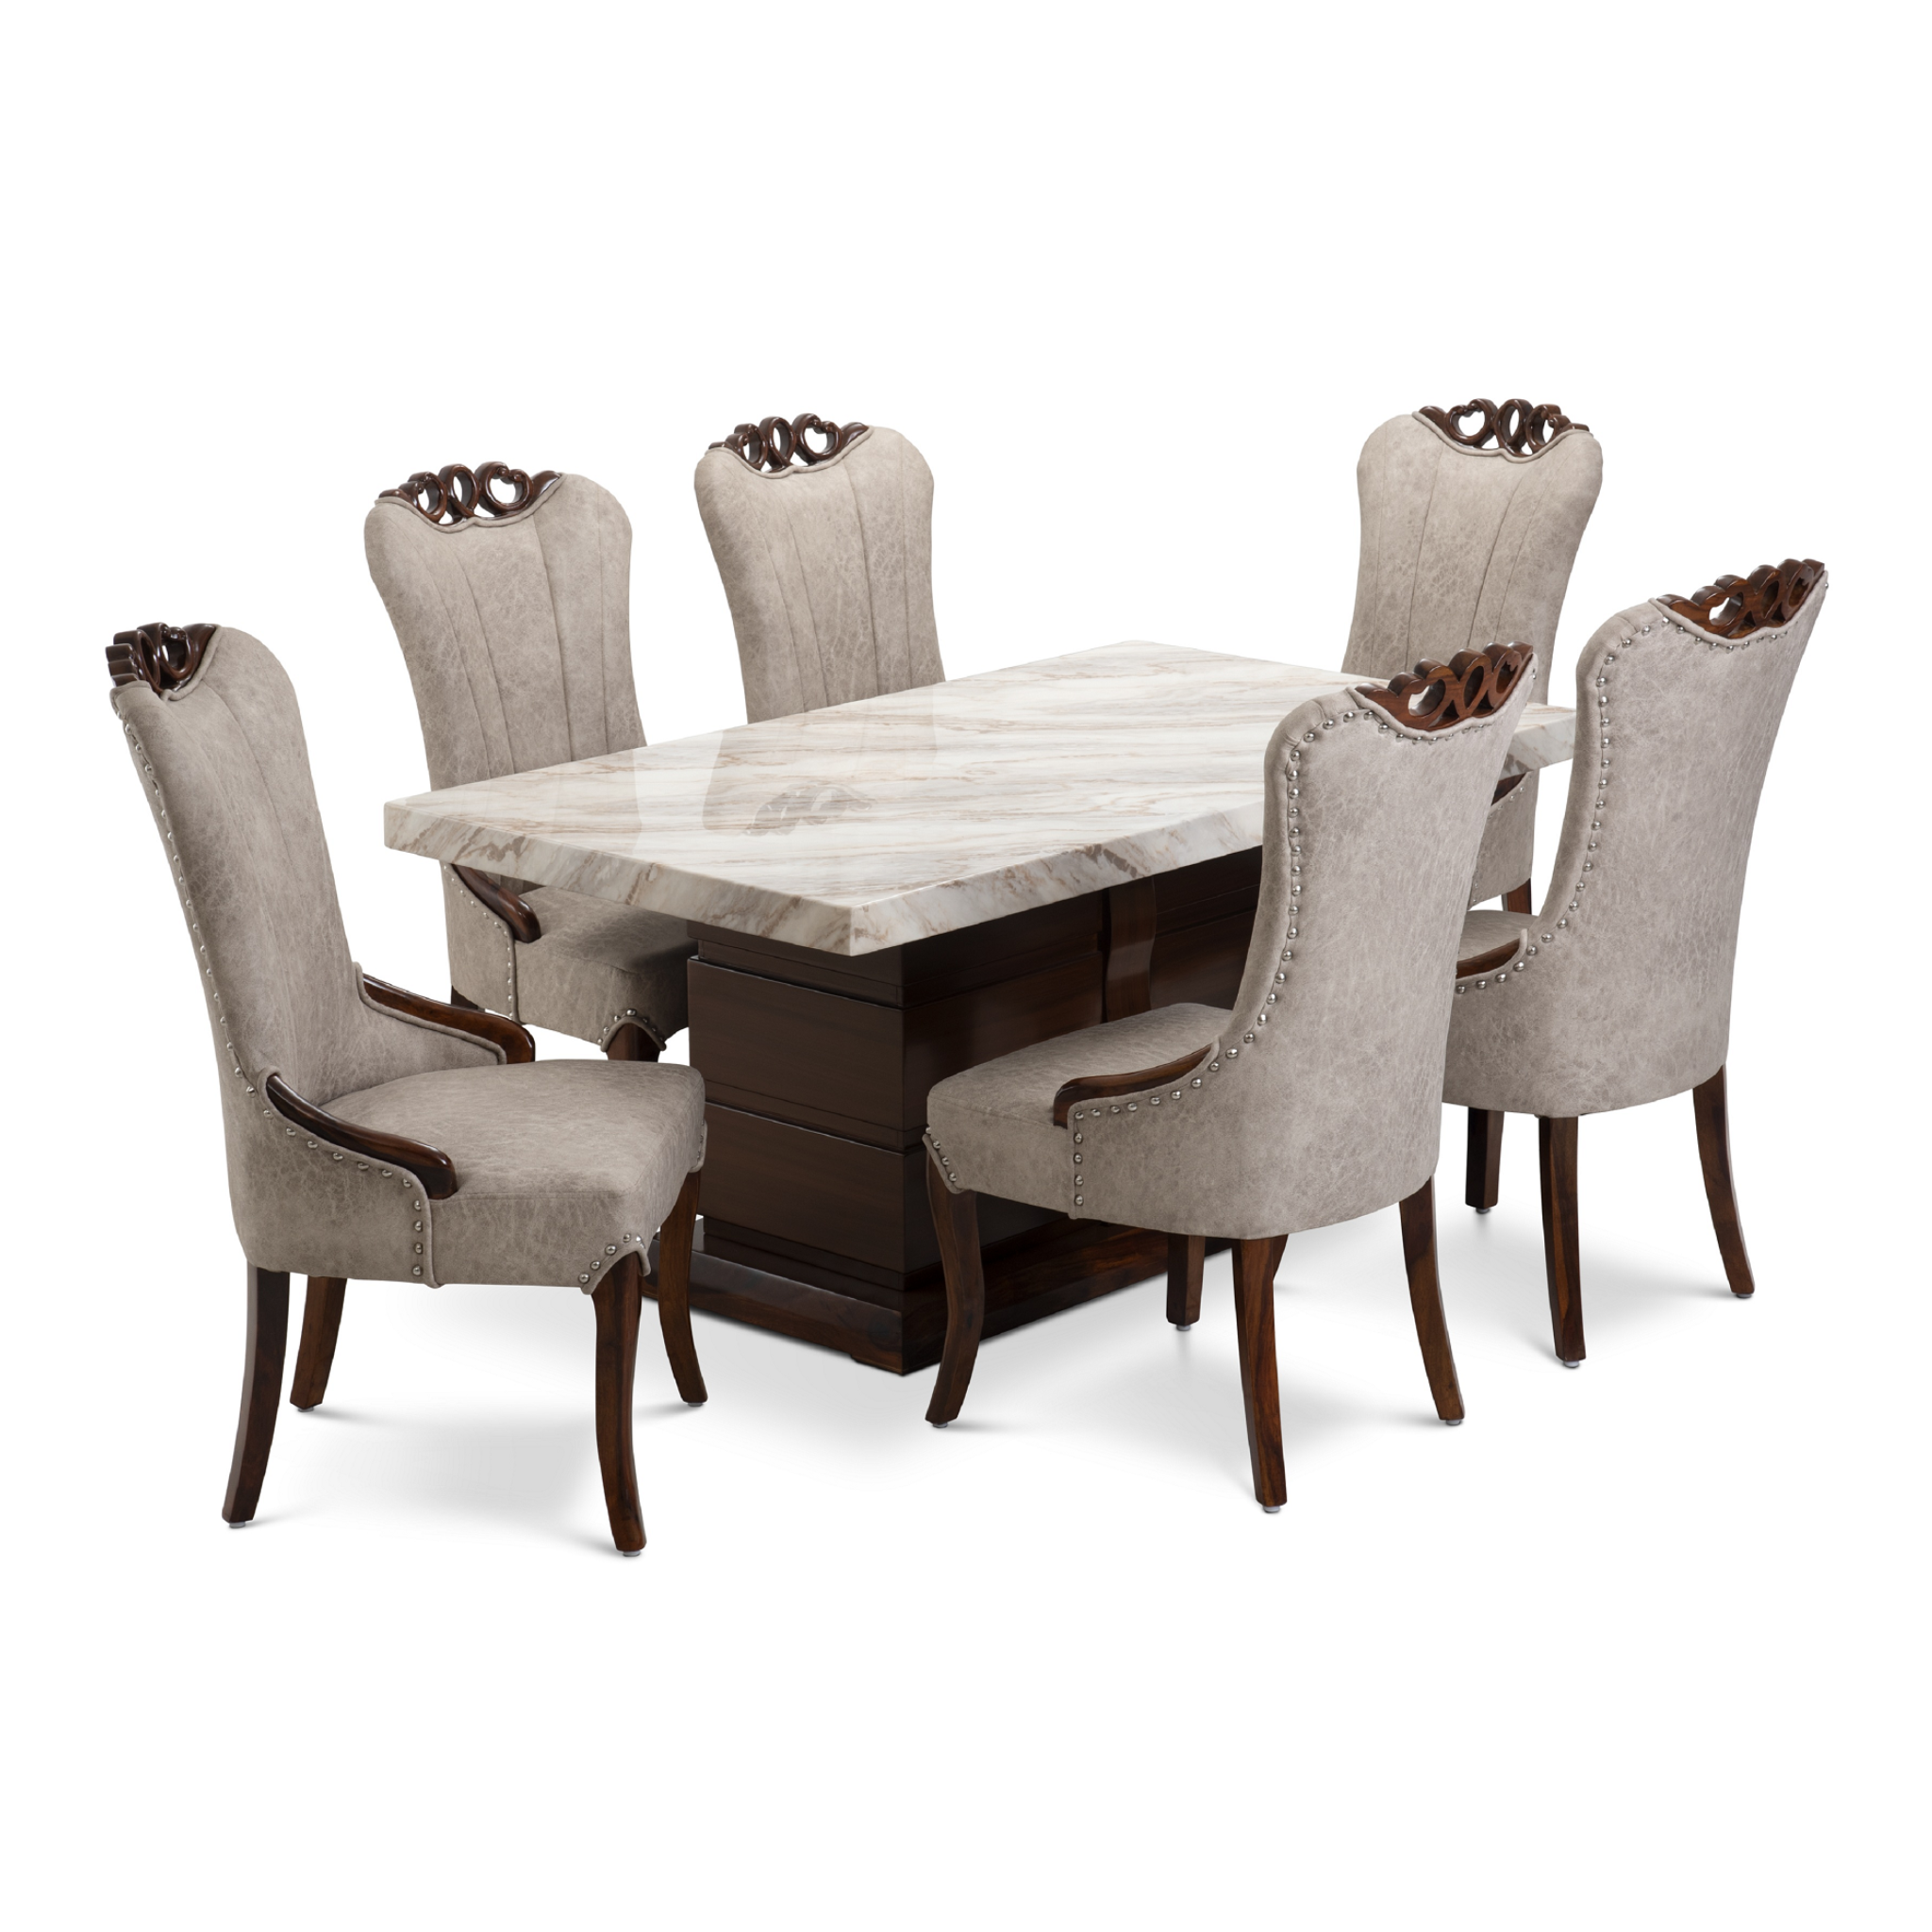 Belmont Dining Table with Chair